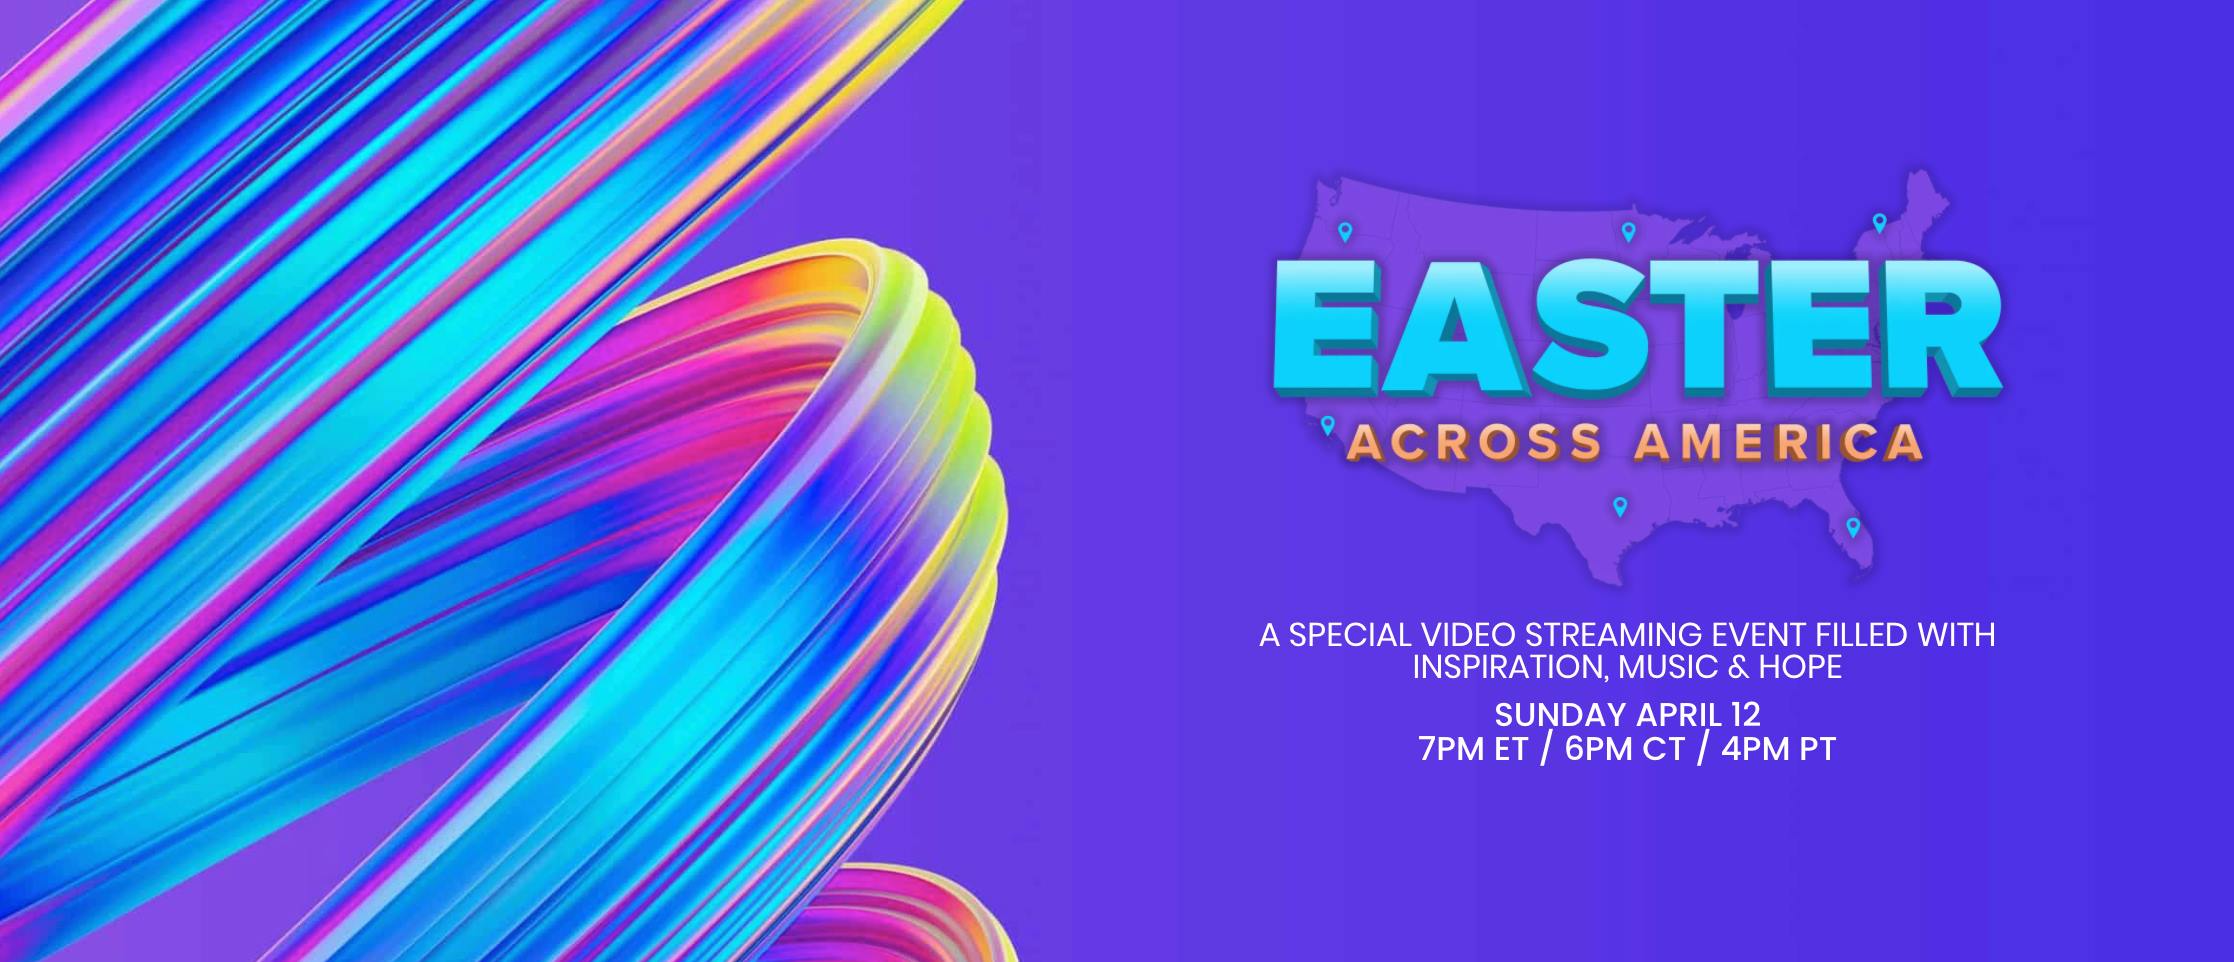 Max Lucado, Miles McPherson, and Nick Vujicic Among Pastors and Christian Entertainers Hosting Two-Hour “Easter Across America” Video Streaming Event